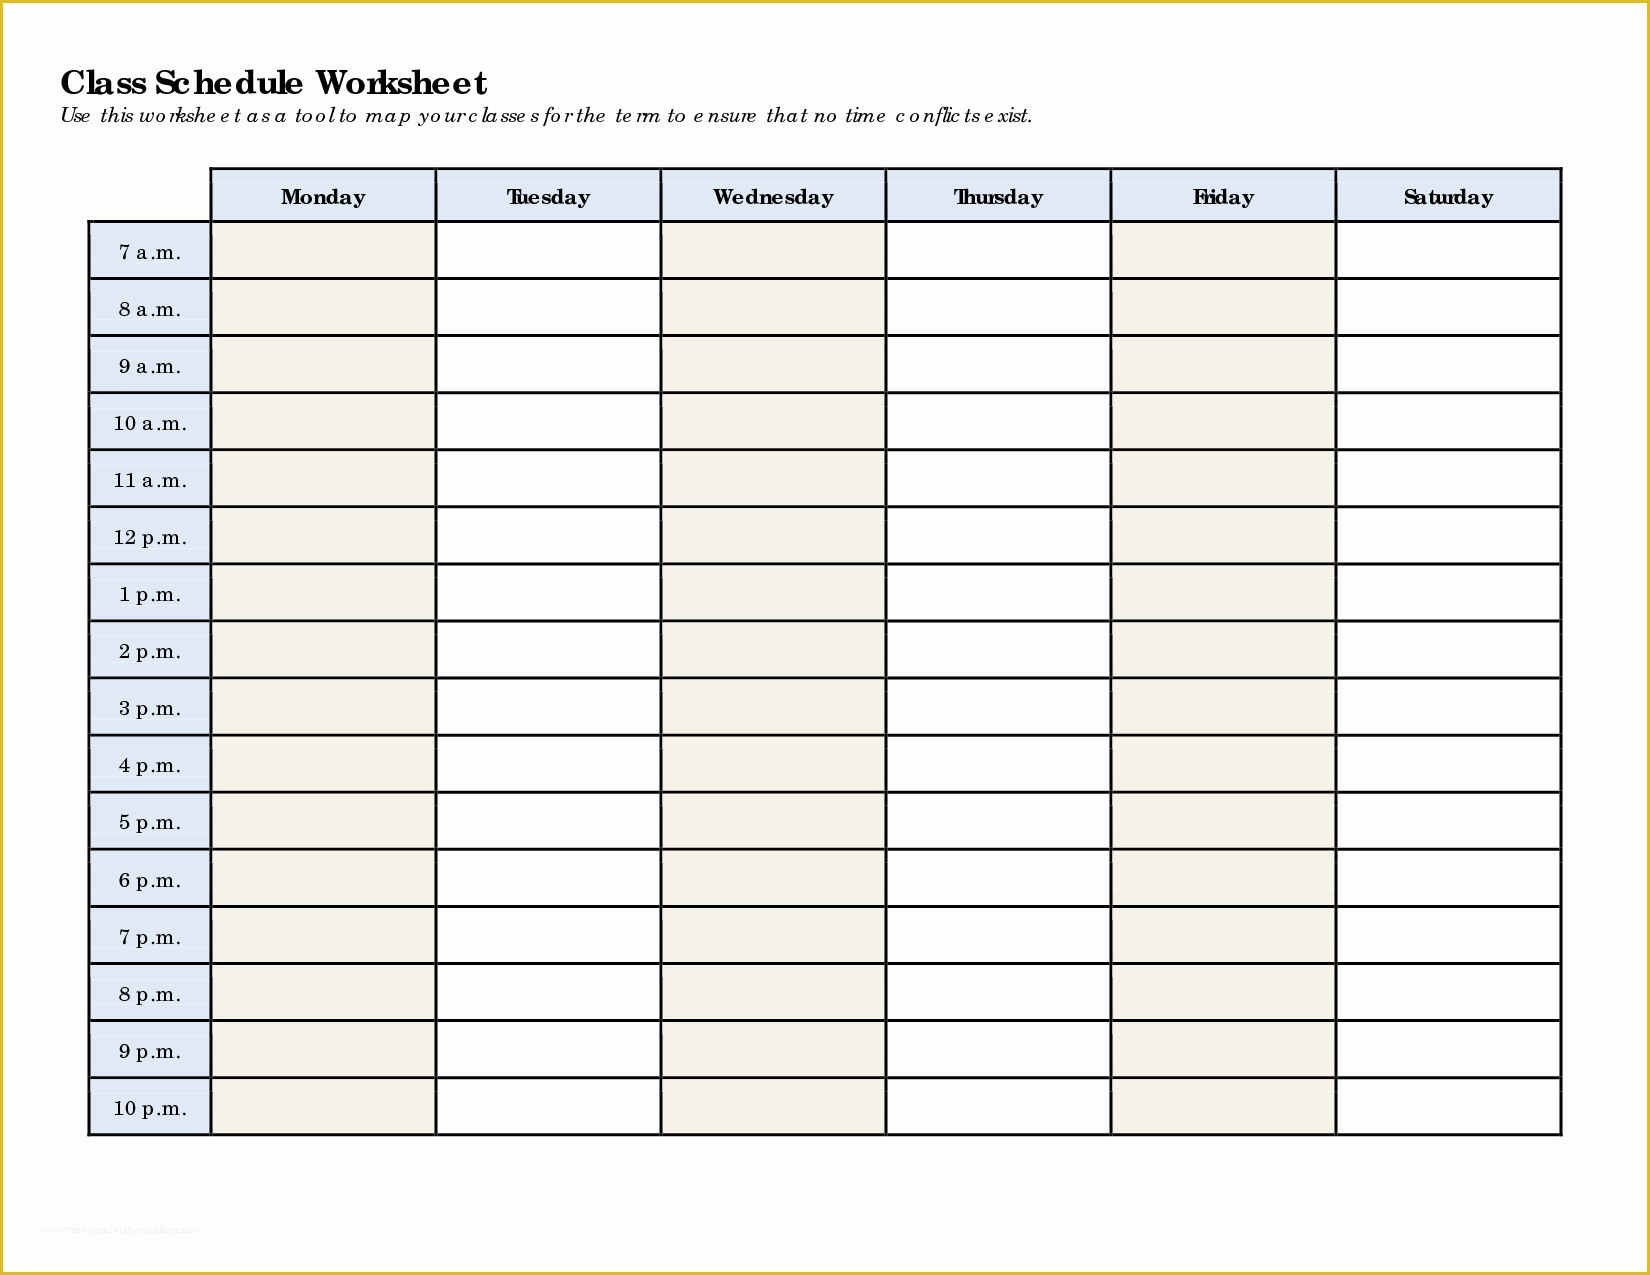 Free Time Schedule Template Of Time Table Worksheets Times Table Worksheet Circles Times